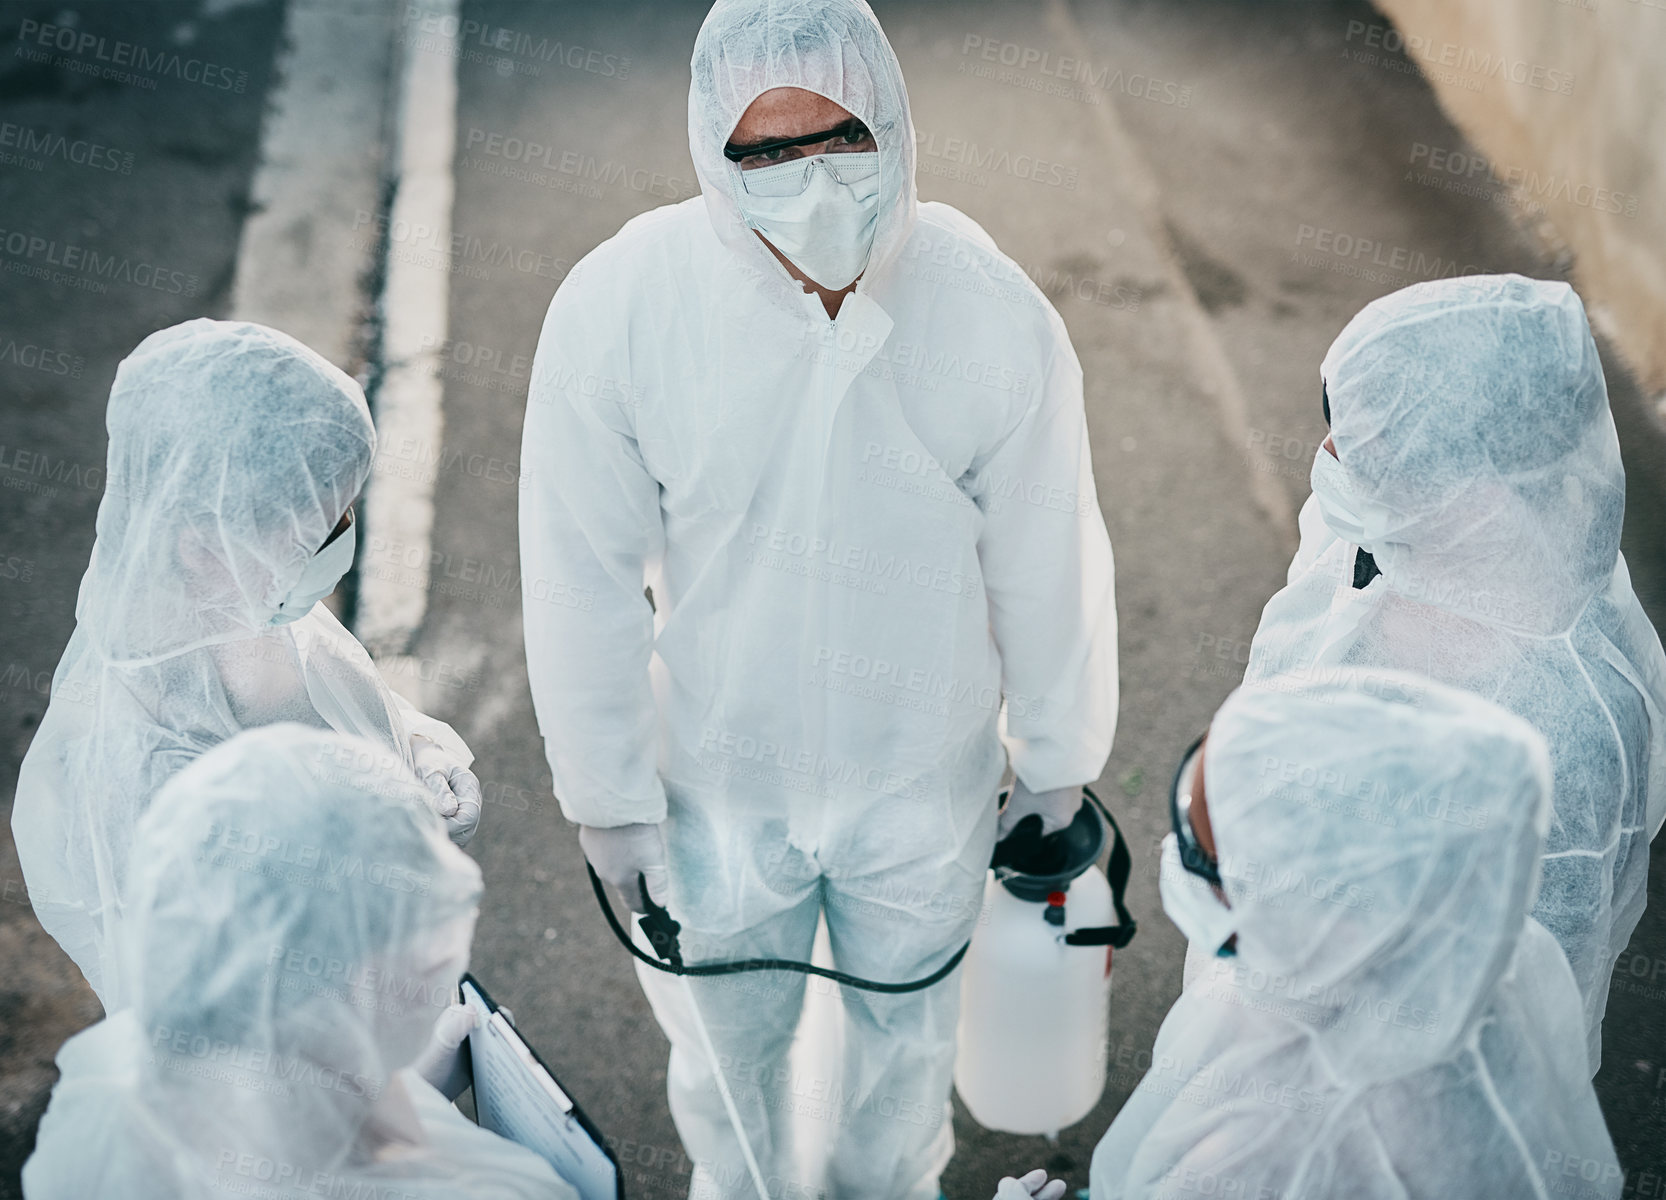 Buy stock photo Covid pandemic outbreak team of doctors or medical workers wearing protective ppe to prevent spread of virus outside. Group of scientists wearing hazmat suit for corona or ebola disease in the street